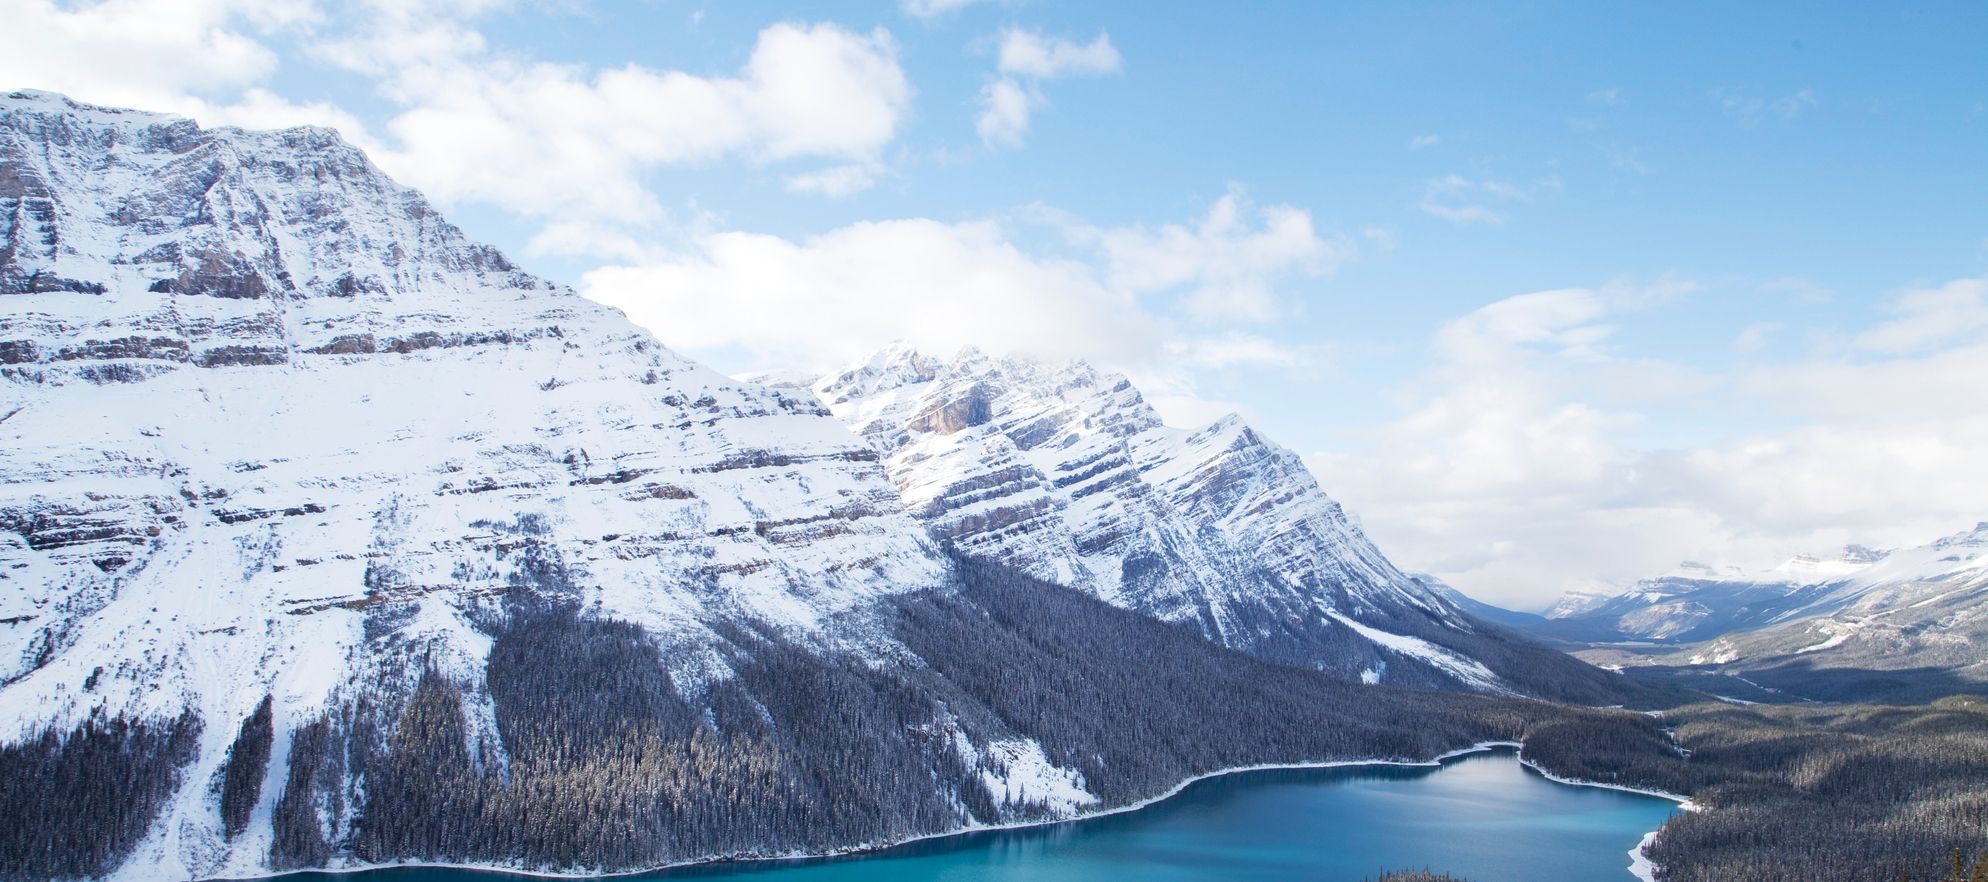 Peyto_Lake_Icefields_Parkway_Winter